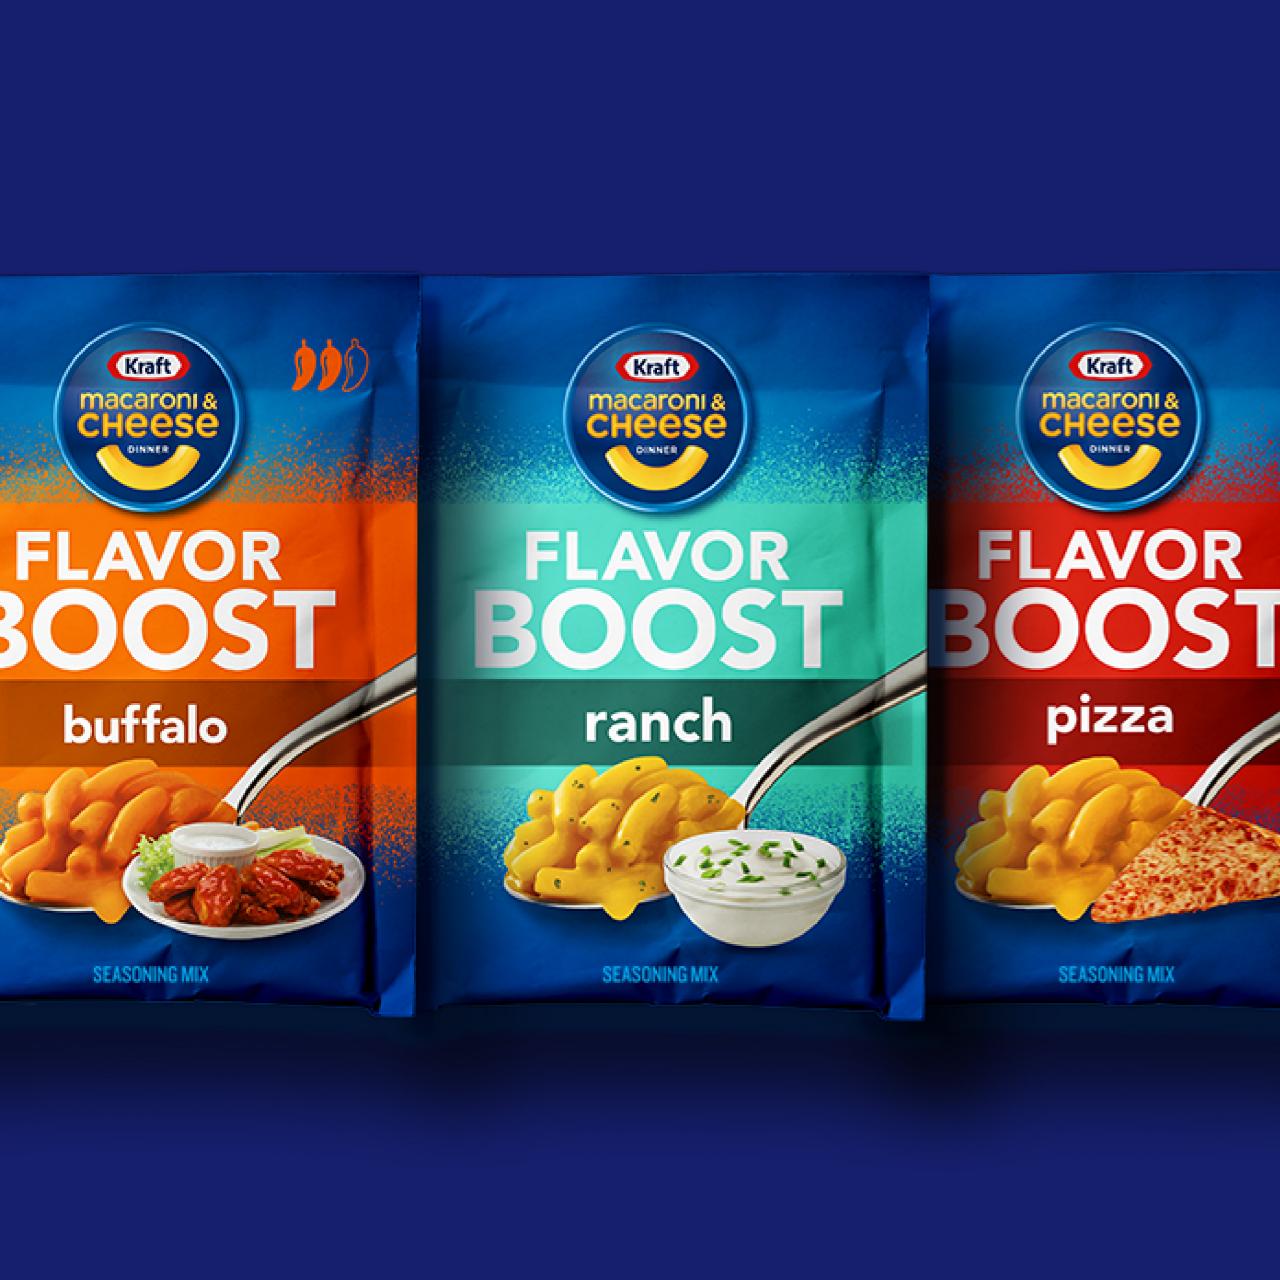 Where to Buy Kraft Mac & Cheese Flavor Boosters